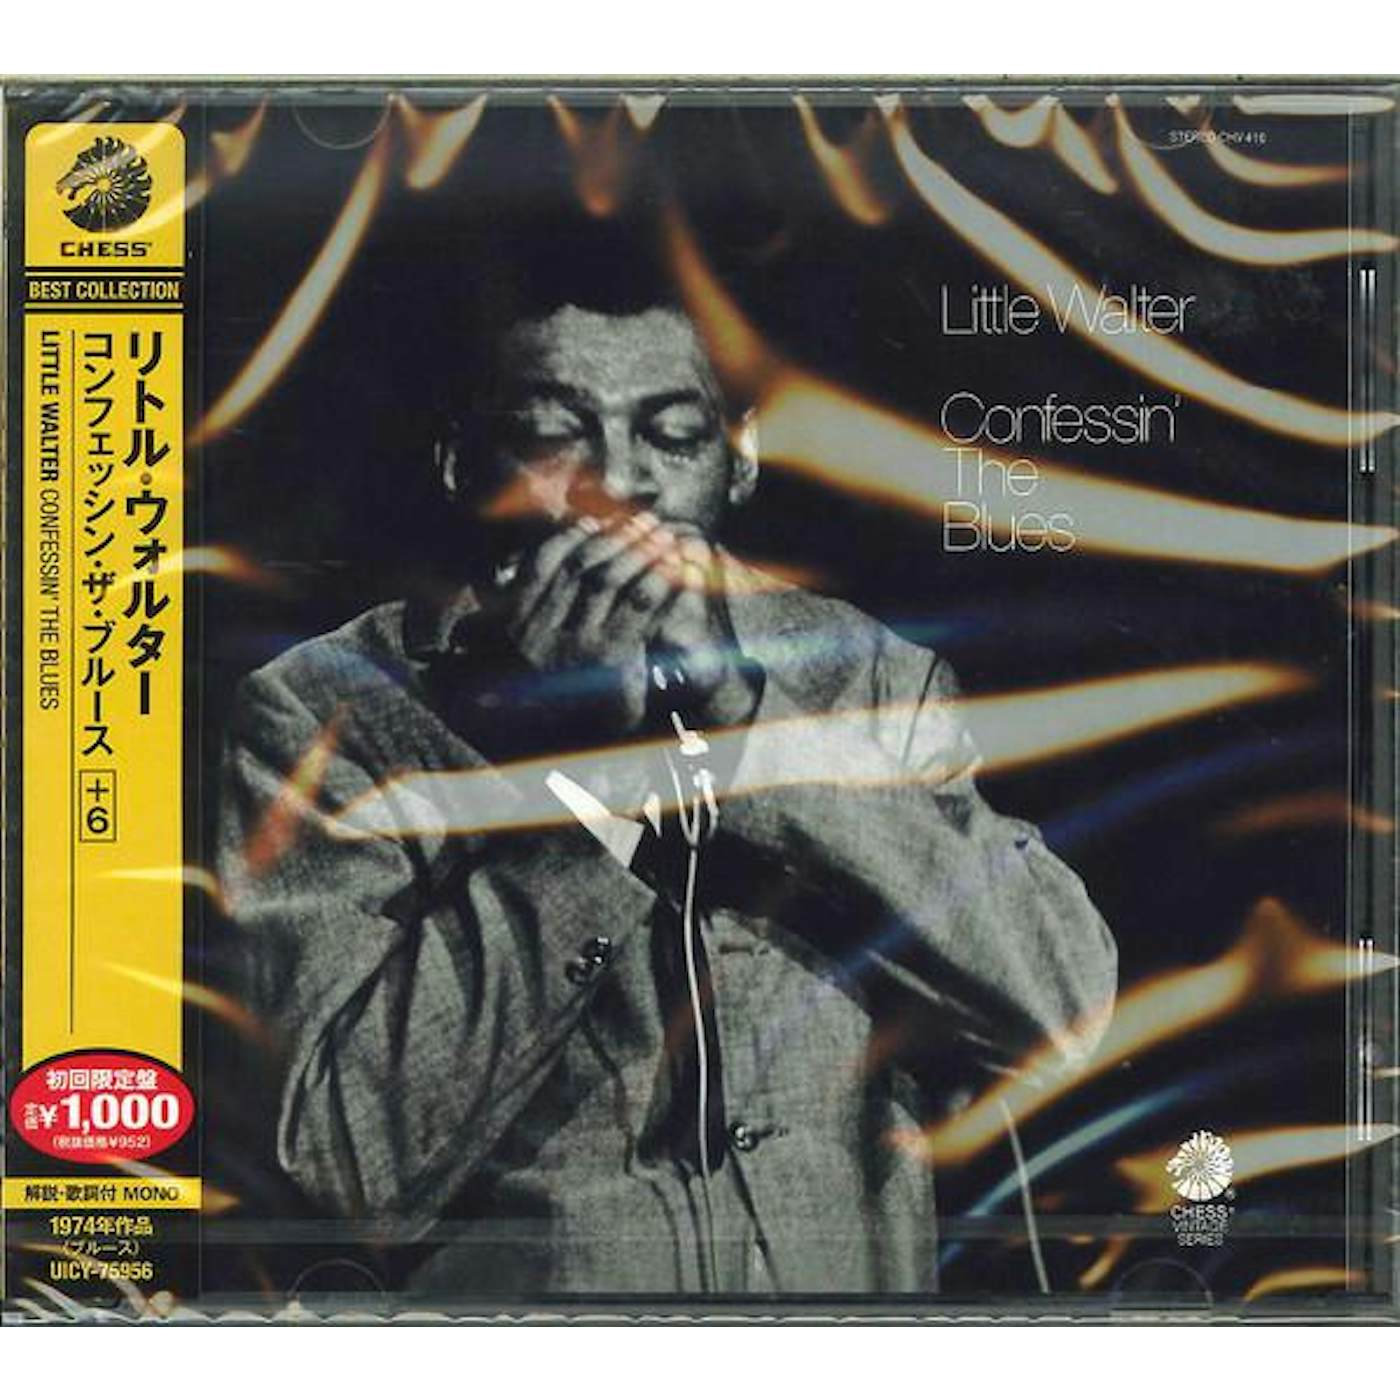 Little Walter CONFESSIN' THE BLUES (LIMITED) CD